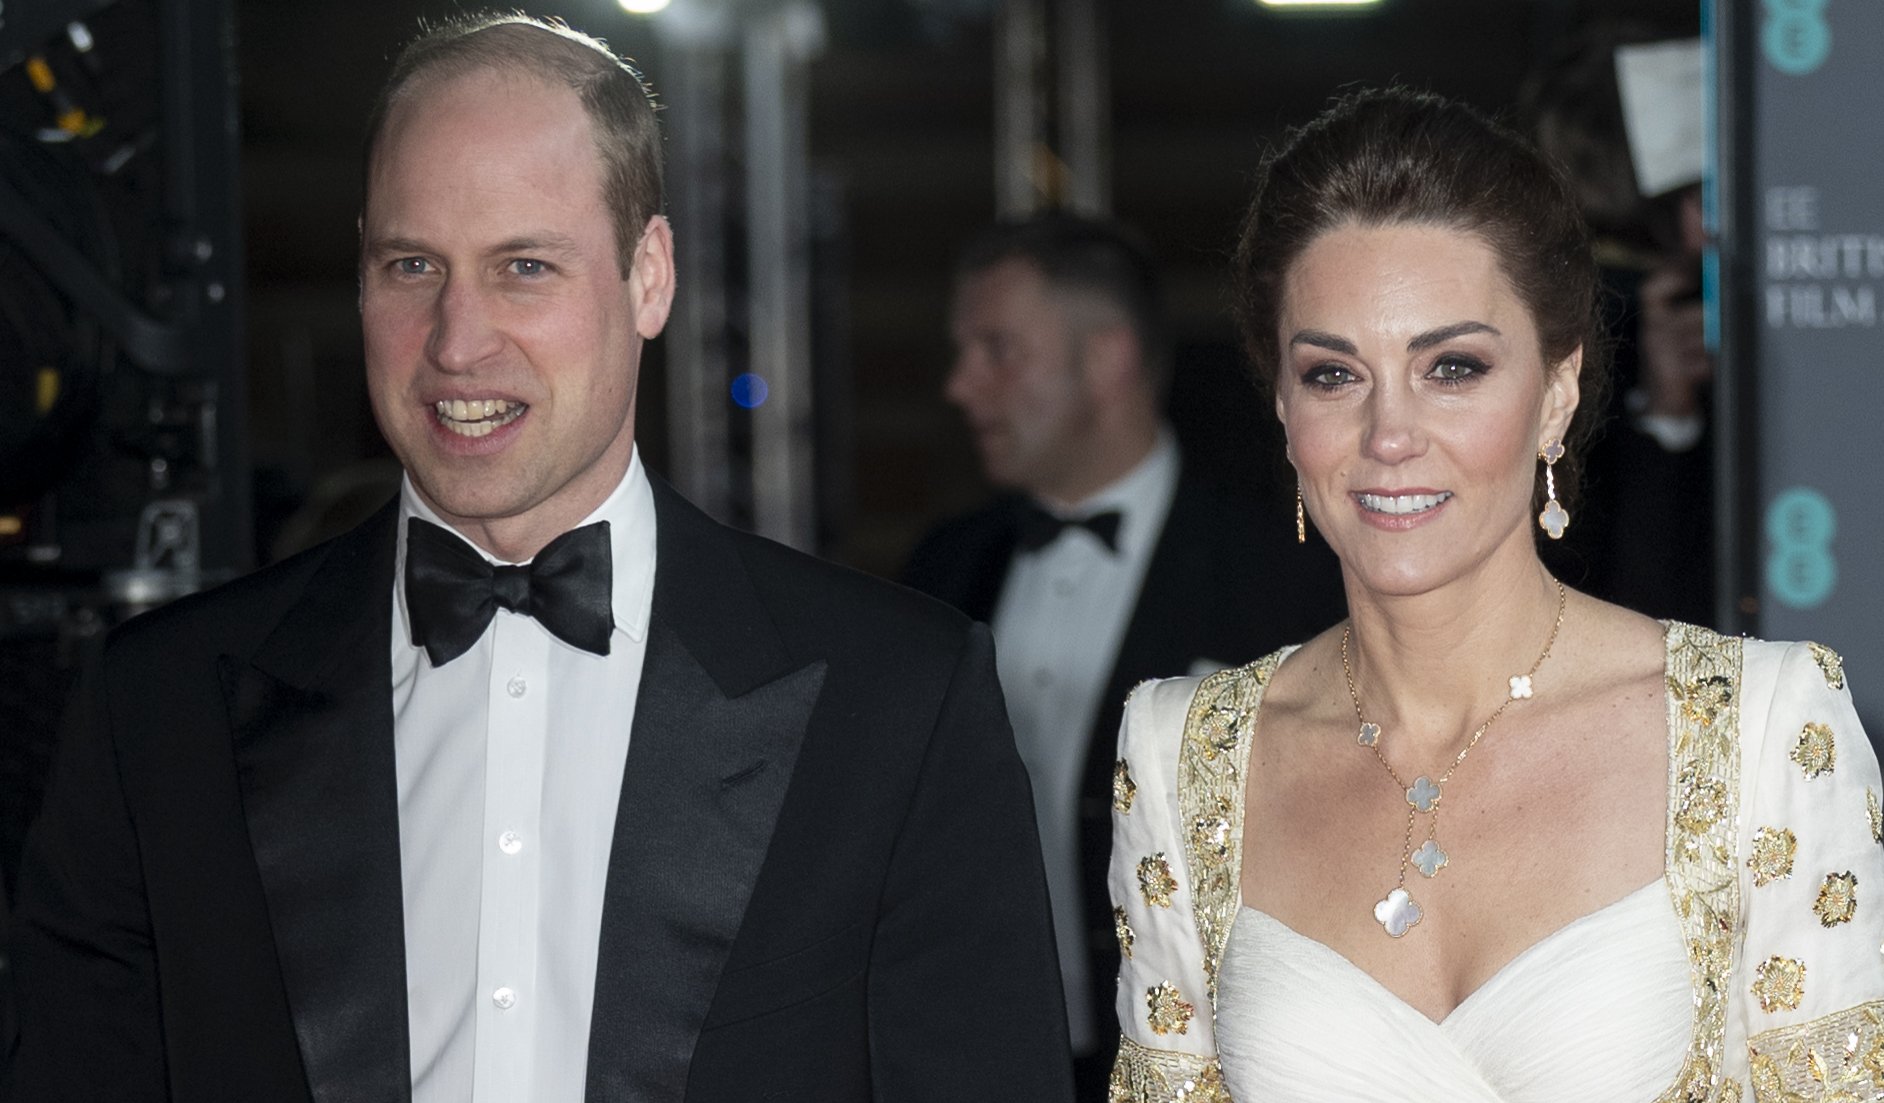 Prince William, Duke of Cambridge, and Catherine, Duchess of Cambridge attend the EE British Academy Film Awards 2020 at Royal Albert Hall on February 2, 2020, in London, England. | Source: Getty Images